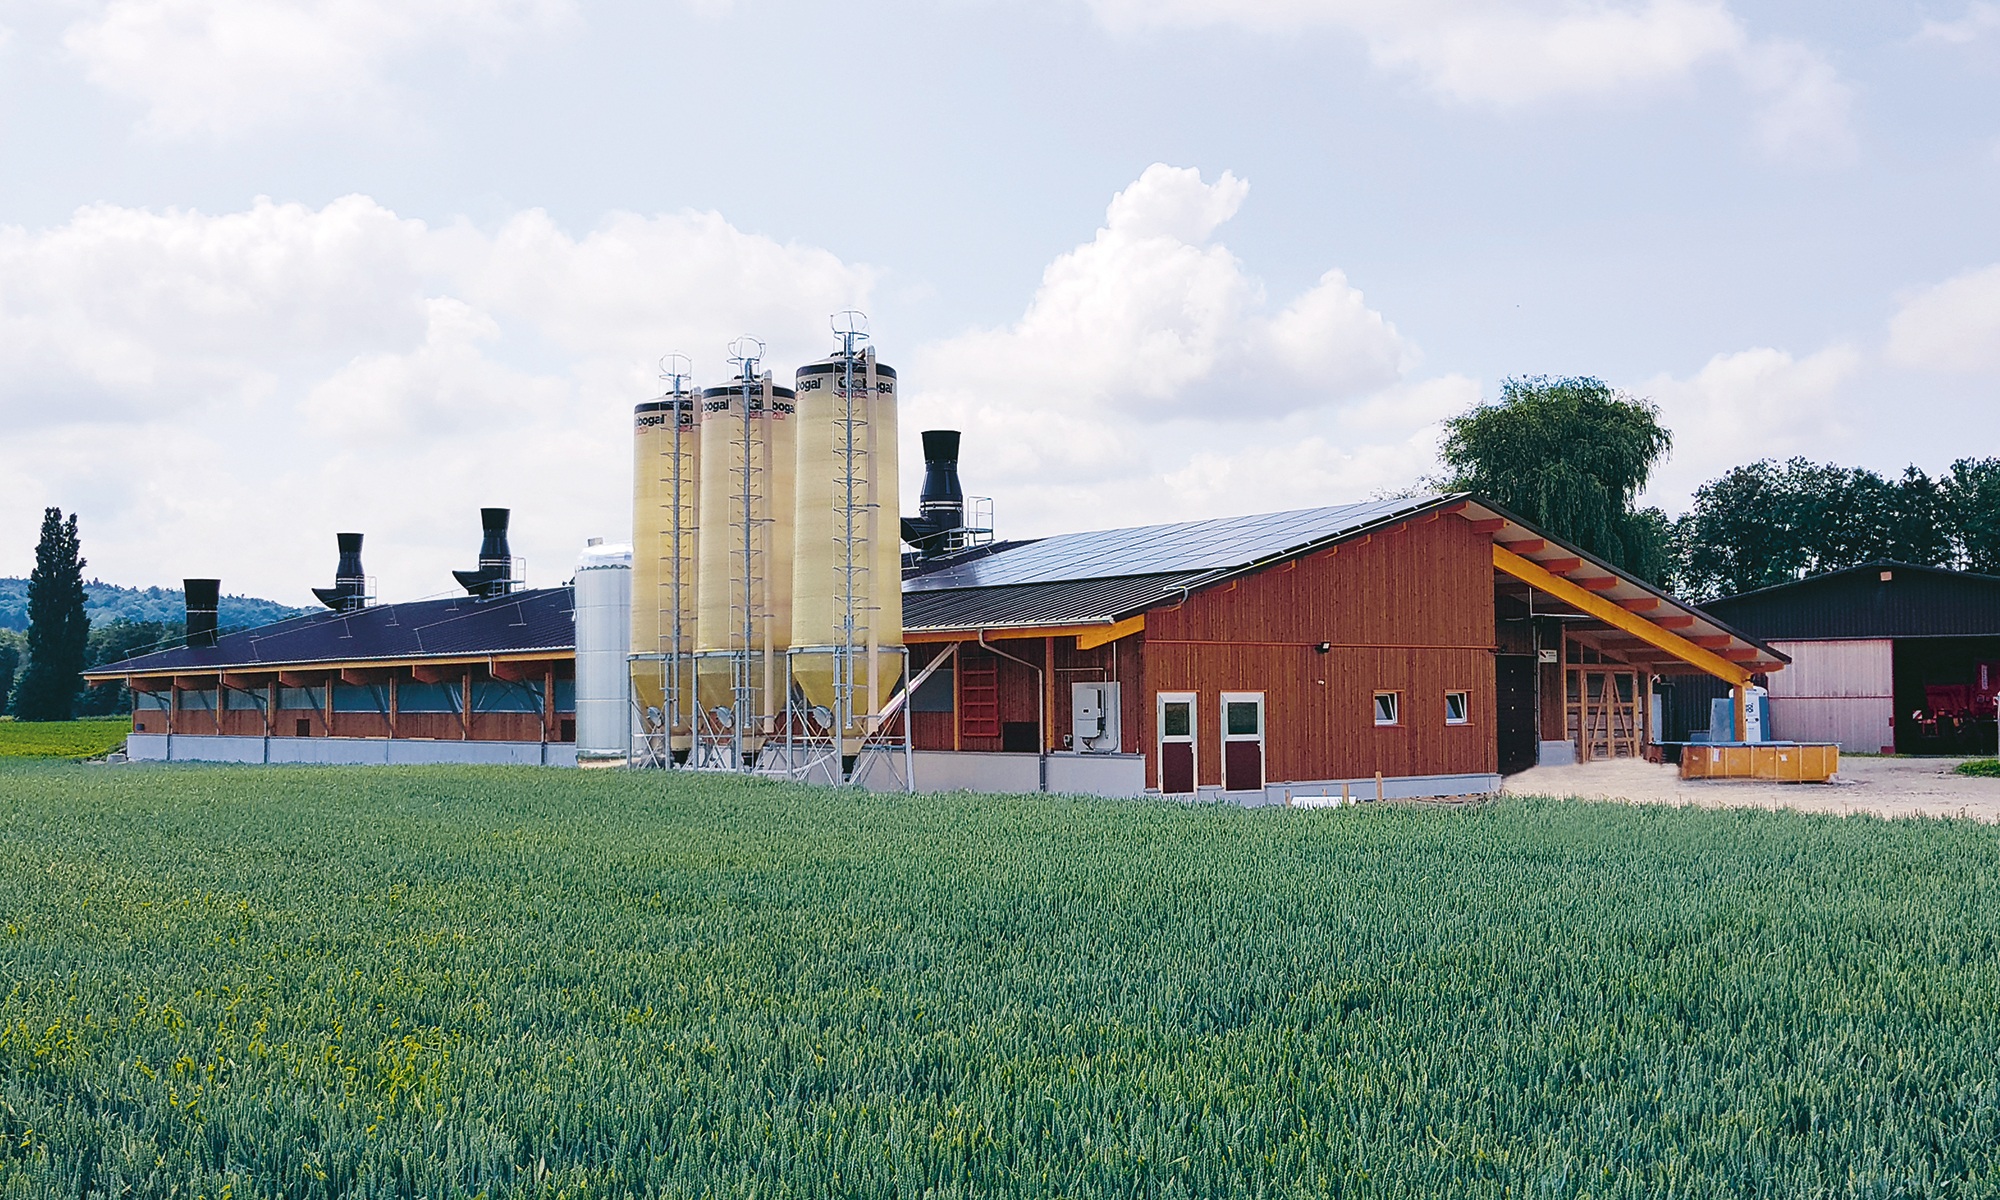 The timber construction provides ample space for agricultural purposes.